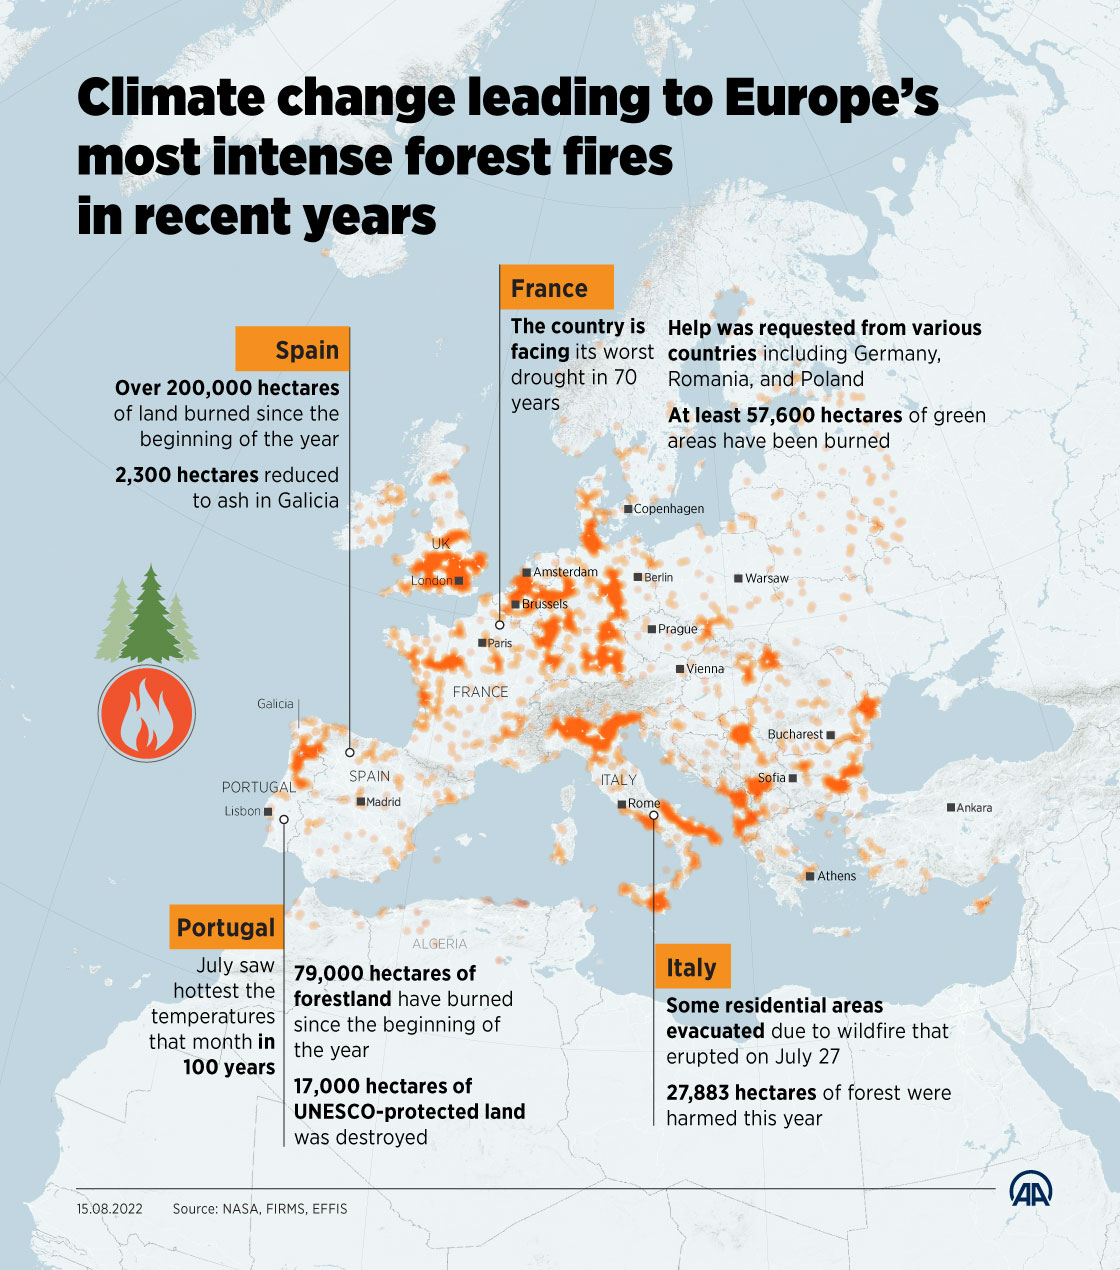 Climate change leading to Europe's most intense forest fires in recent years